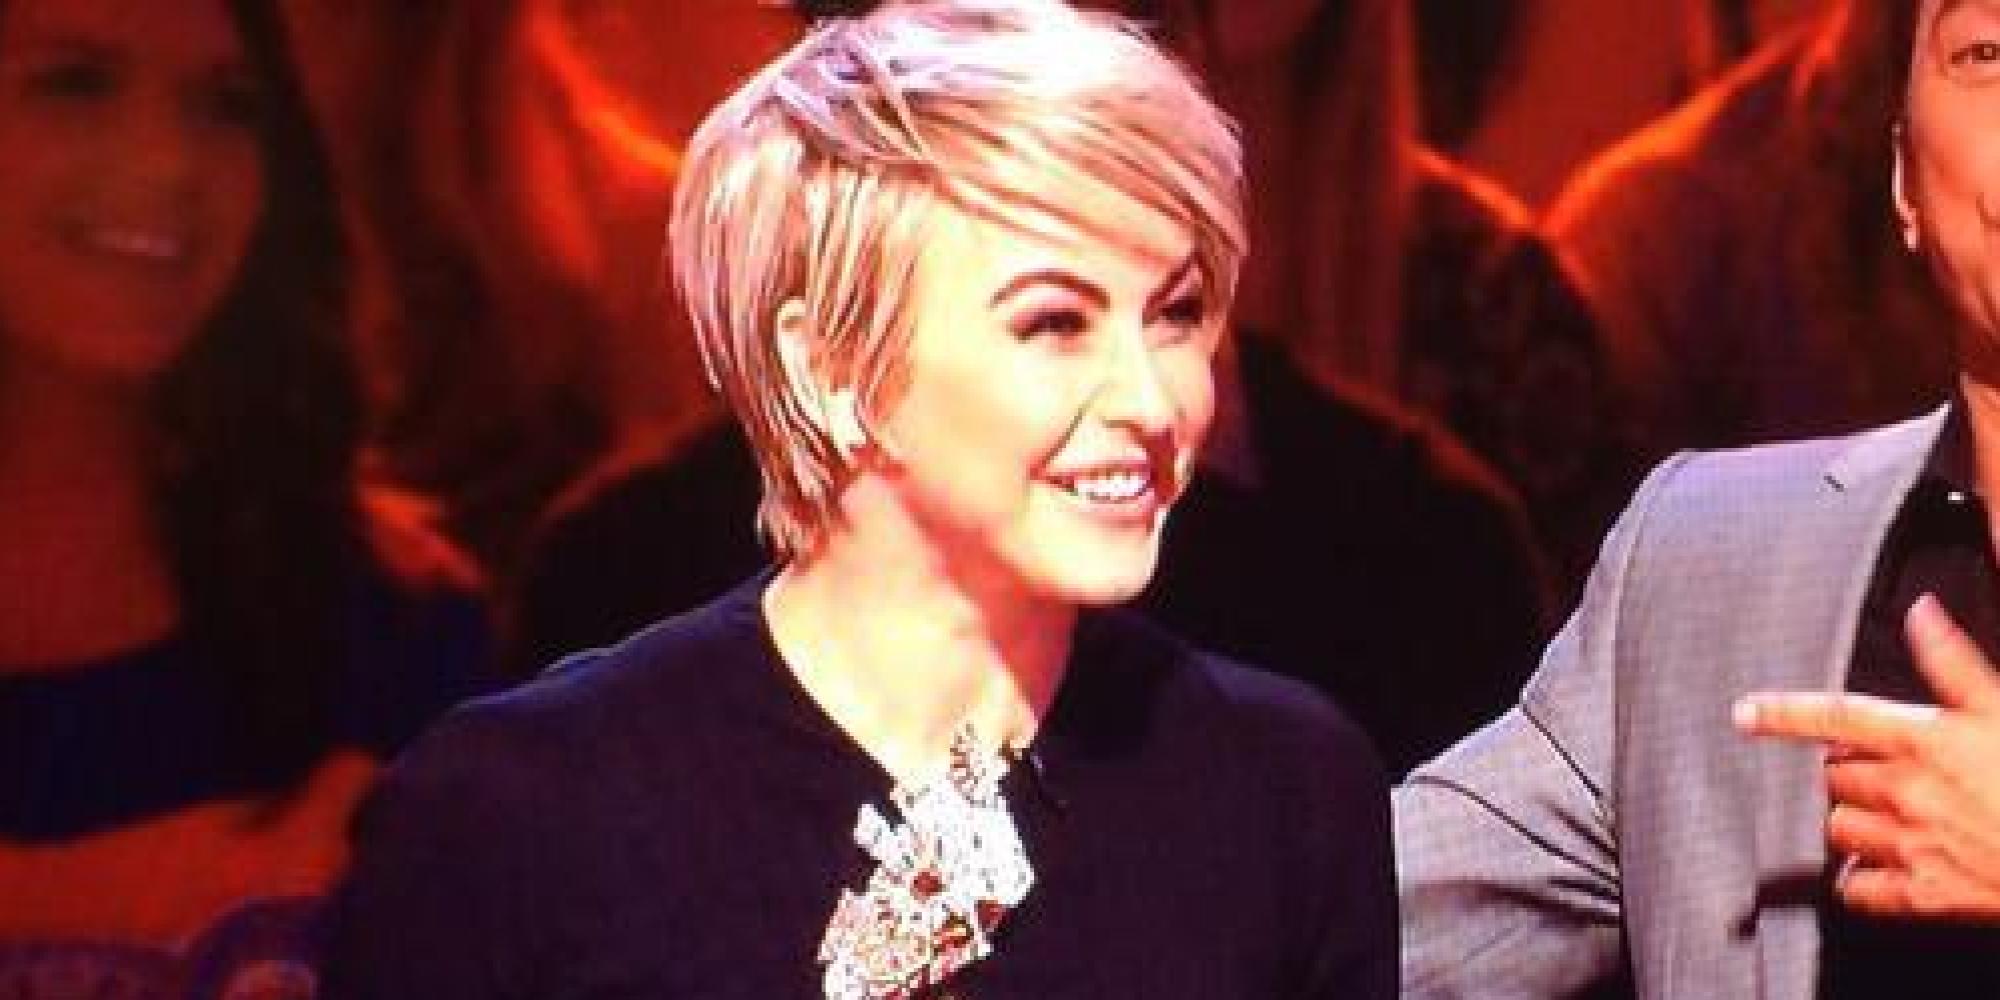 Julianne Hough Rocks Revealing Dress While Guest Judging On 'DWTS' | HuffPost